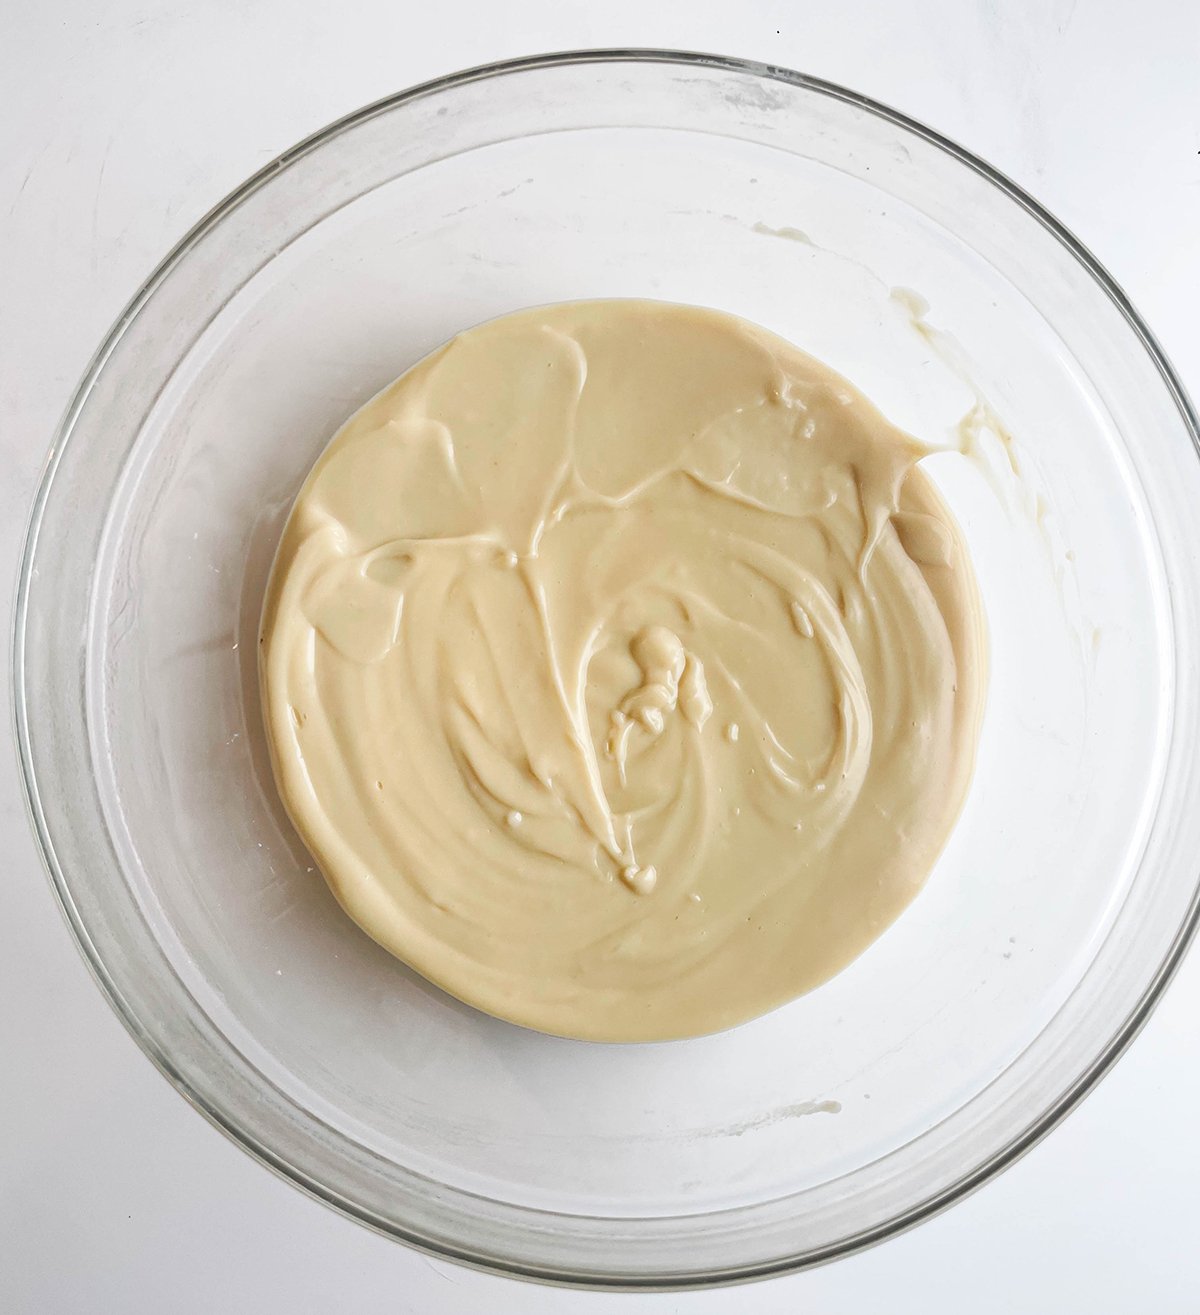 Pour into glass bowl, whisk in vanilla and butter until smooth.